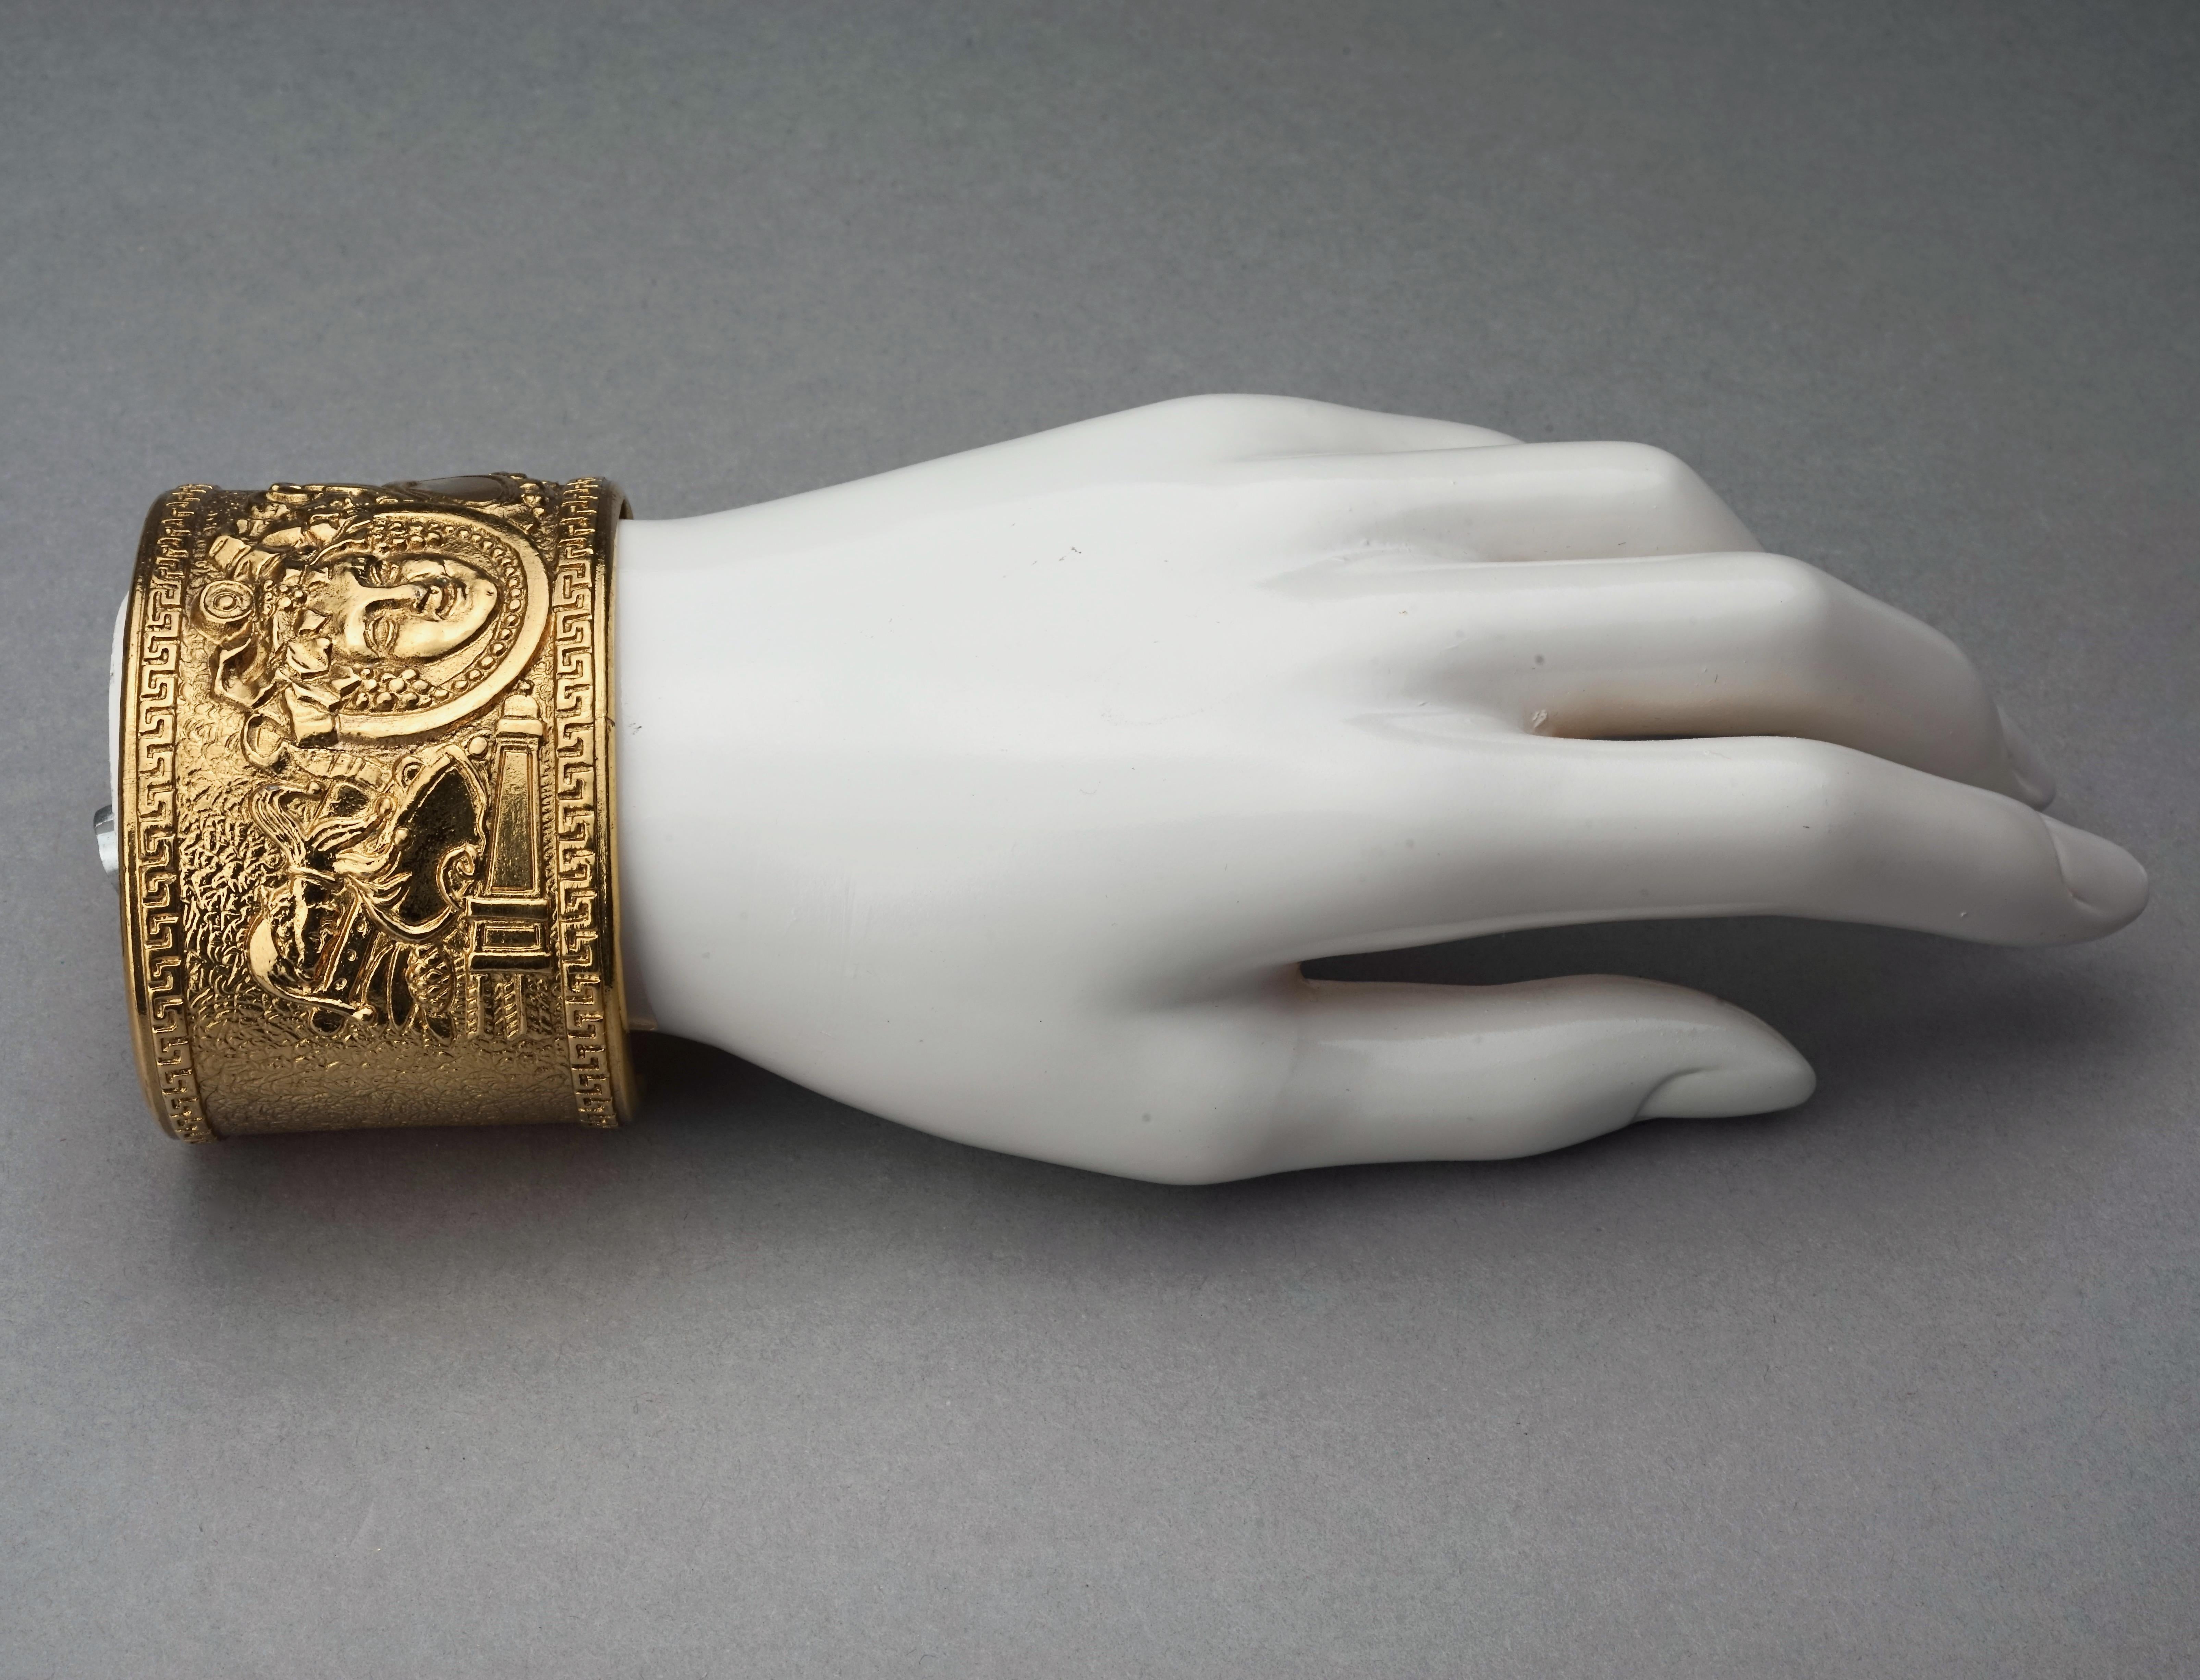 COMEDIE FRANCAISE Bacchus Figural Cuff Bracelet Attributed to Christian Lacroix 

Measurements:
Height: 1.77 inches (4.5 cm)
Inner Circumference: 6.88 inches (17.5 cm) including the opening

Features:
- 100% Authentic COMEDIE FRANCAISE attributed to